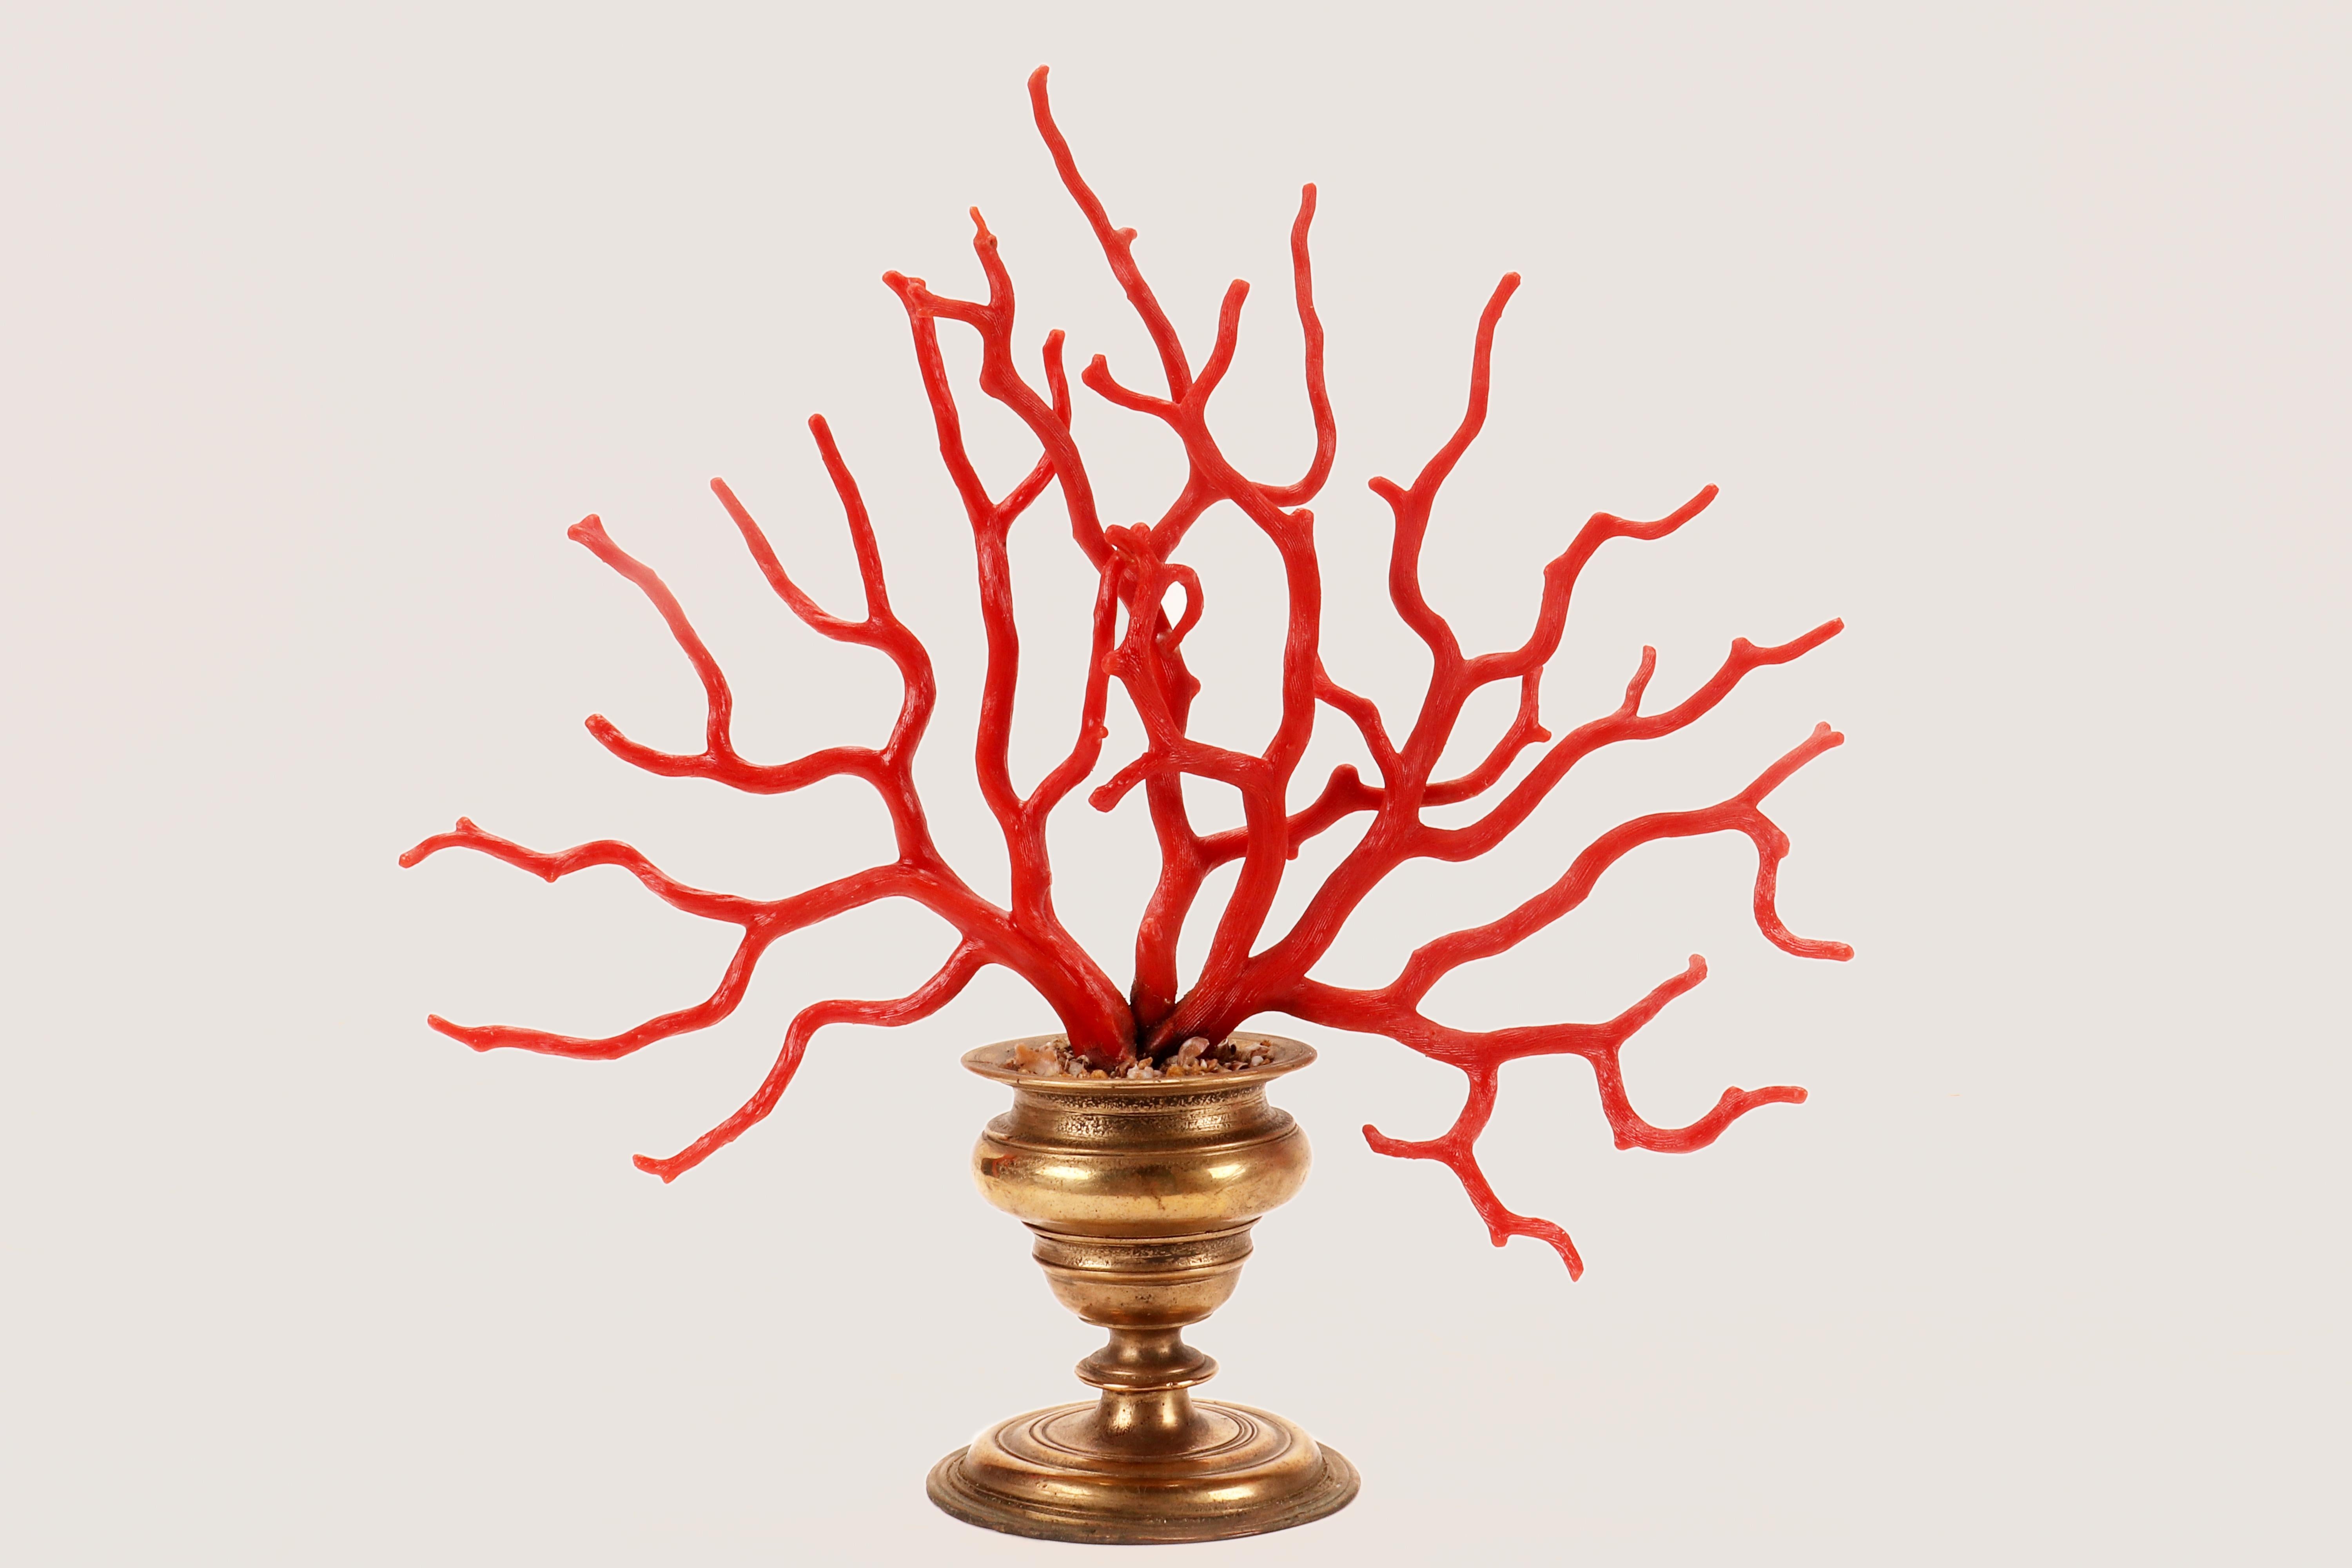 This large branch of Mediterranean coral, 'Corallium Rubrum' is mounted on a gilt bronze base. The creation of the vase-shaped base involves various techniques: lost wax casting, mold casting, chiseling. The base is circular, with a ribbed edge, and